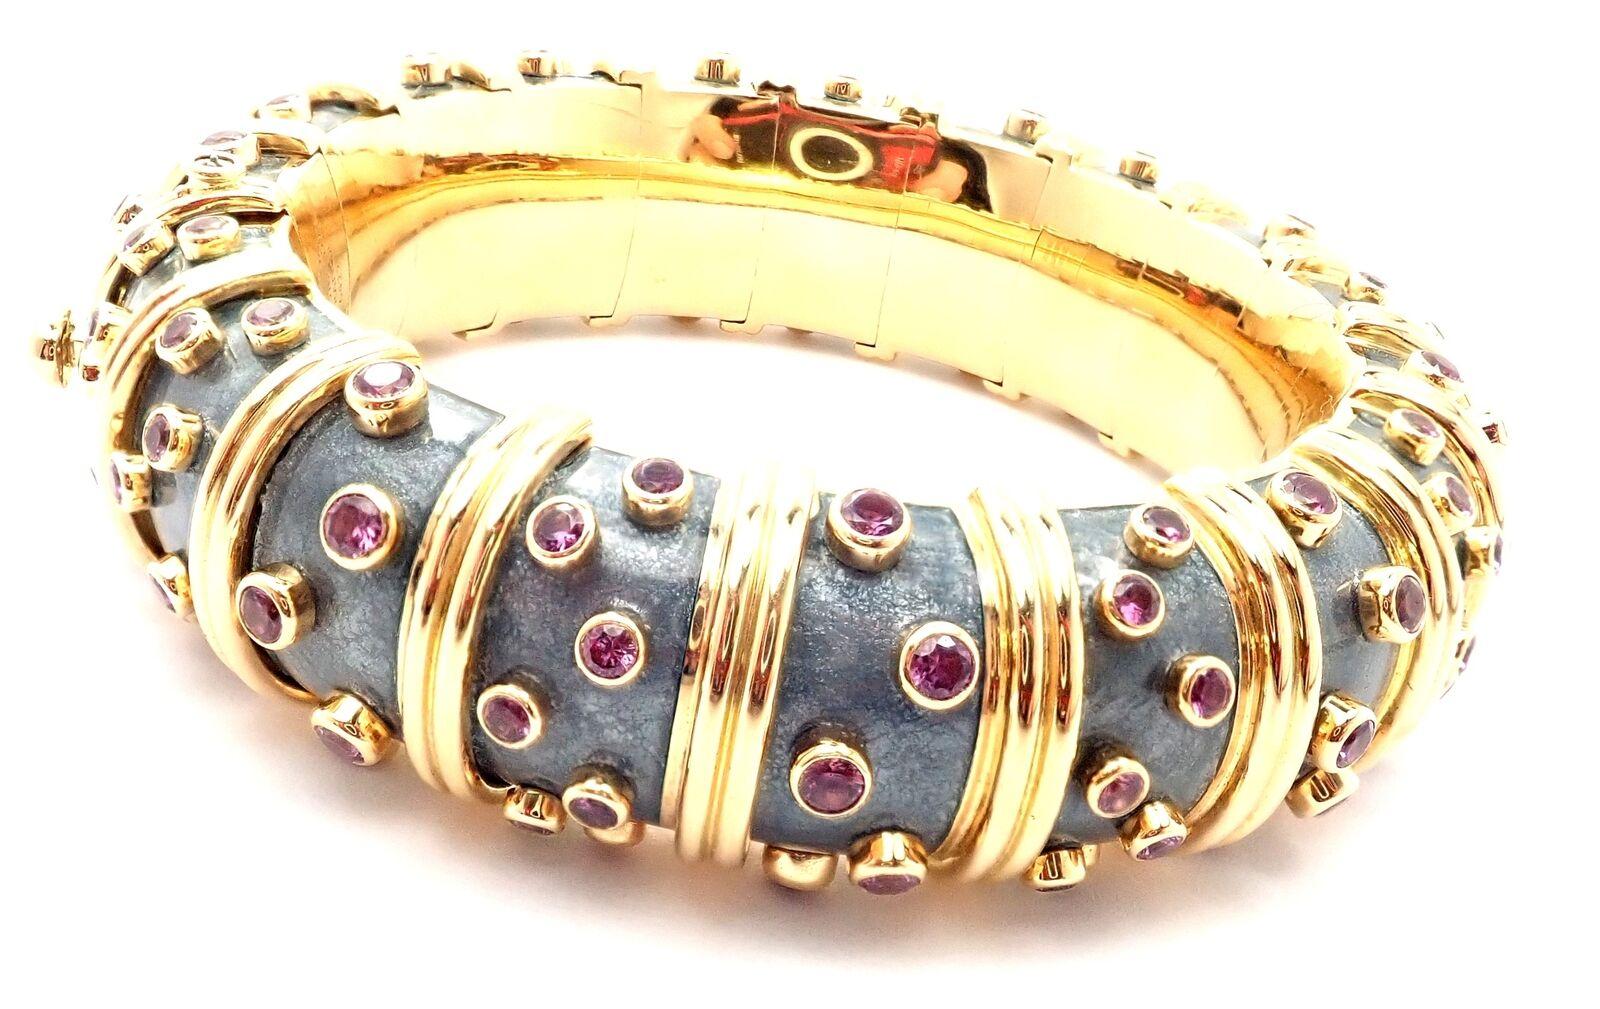 18k Yellow Gold Pink Sapphire PAILLONE Slate Grey Enamel Wide Bangle Bracelet by JEAN SCHLUMBERGER For TIFFANY & Co.
With 108 Round Brilliant Cut pink sapphires total weight approximately 8ct.
This bracelet comes with Tiffany & Co.